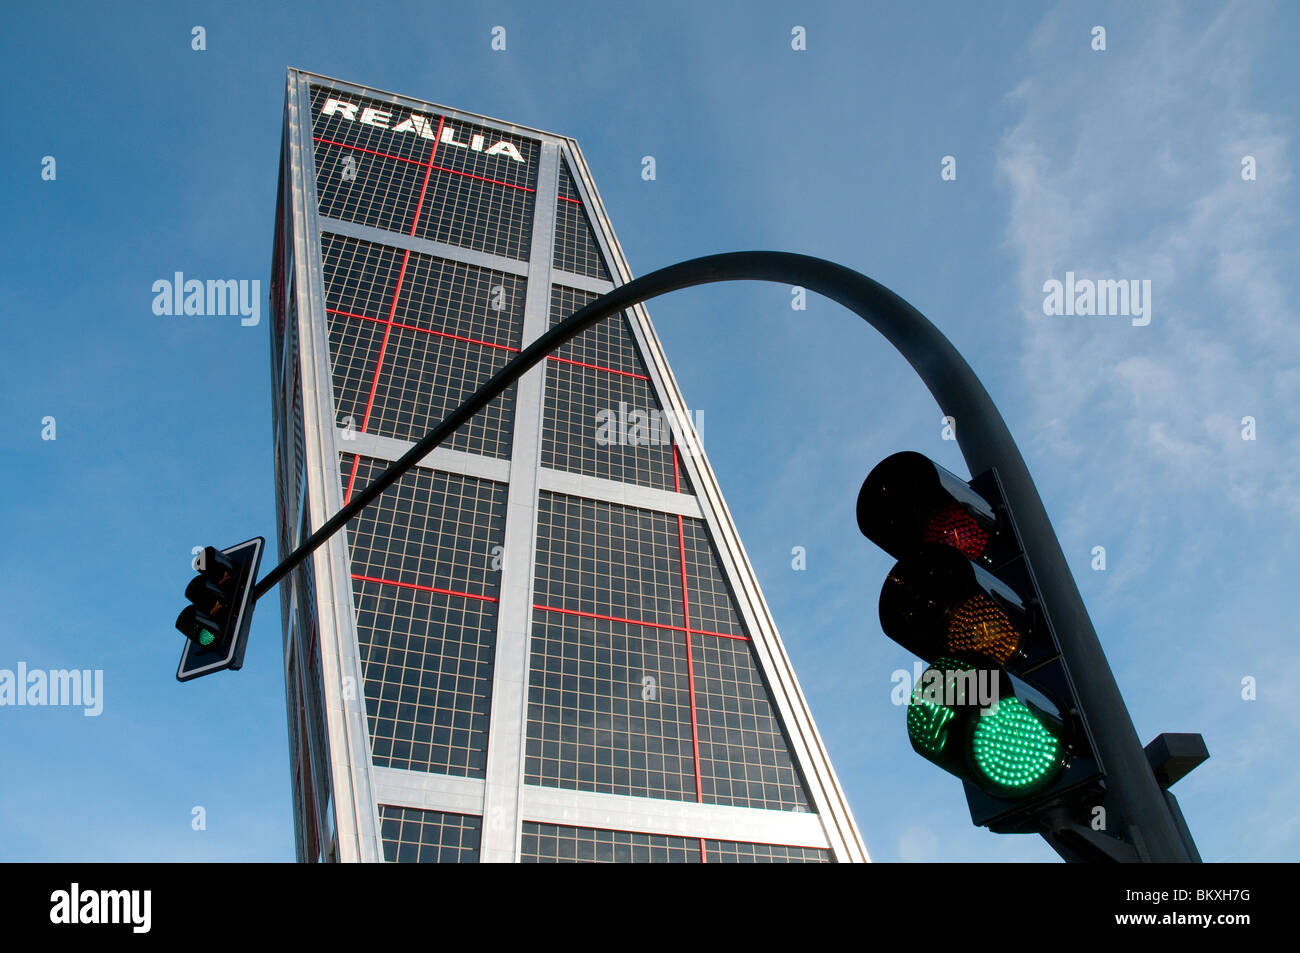 KIO Tower and green traffic light, view from below. Madrid, Spain. Stock Photo